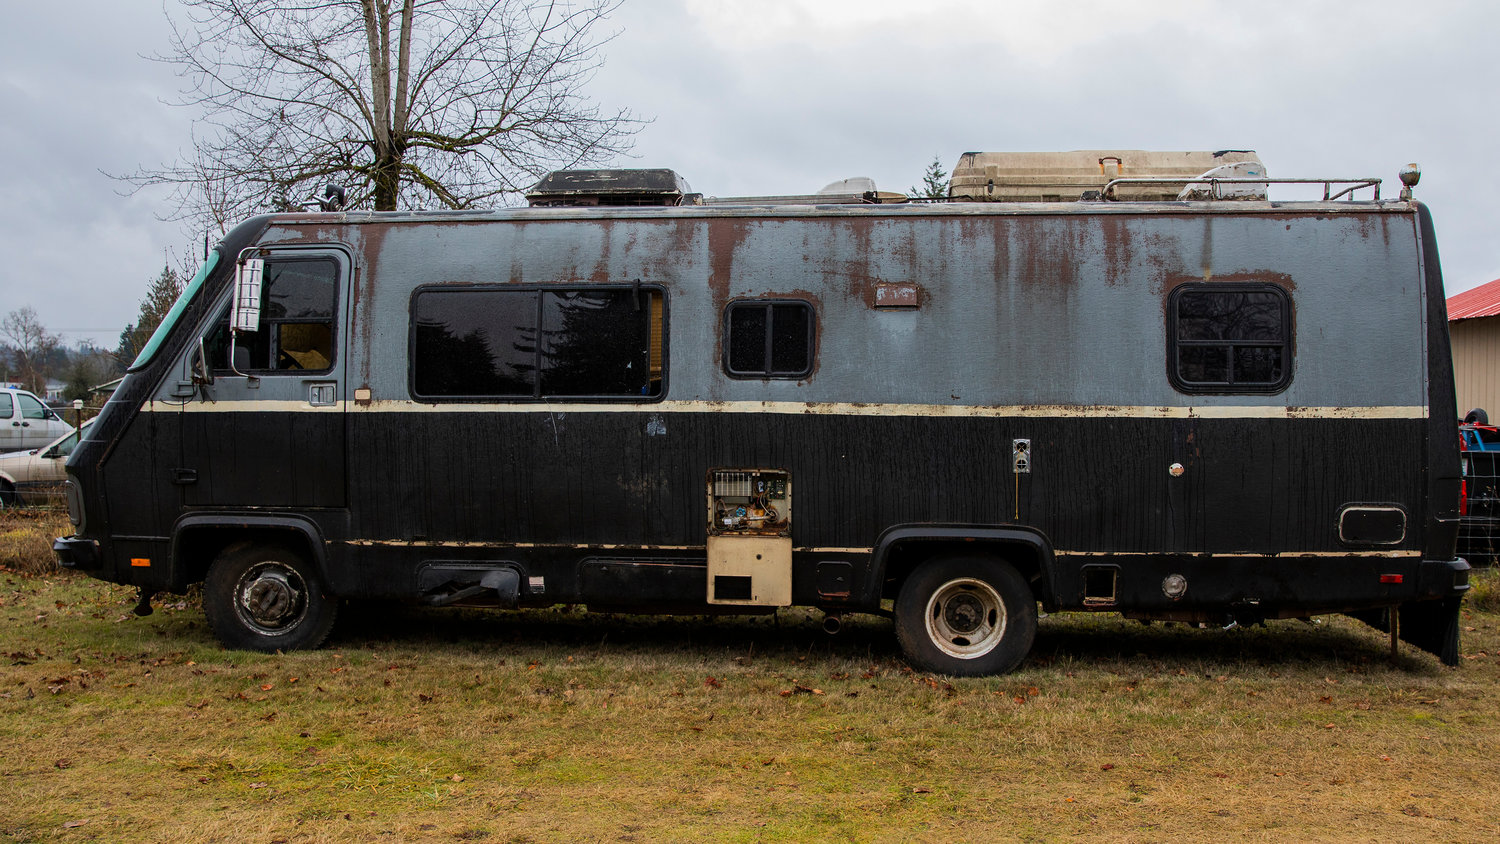 An RV sits abandoned on property in the 2900 block of Fords Prairie Ave. in Centralia last week.